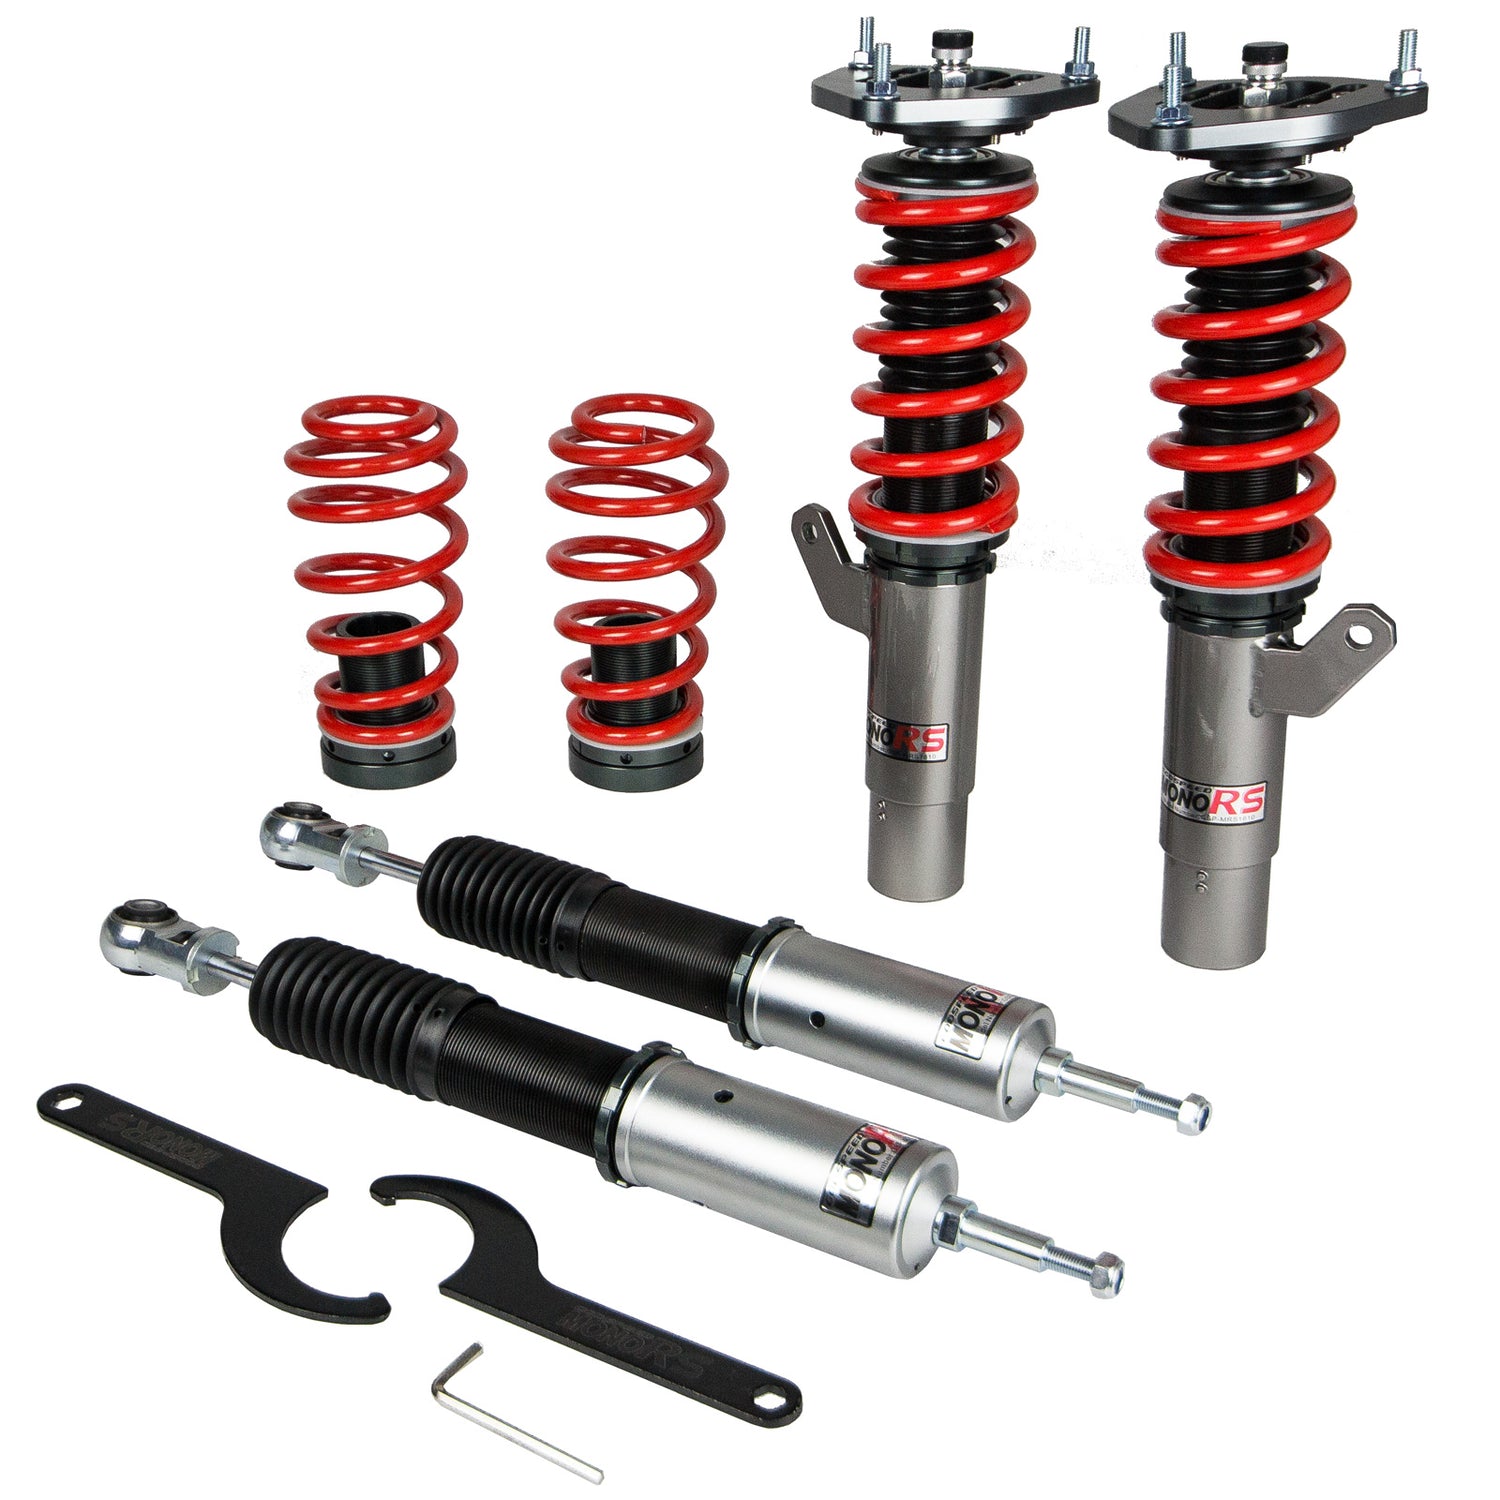 Godspeed MRS1810-B MonoRS Coilover Lowering Kit, 32 Damping Adjustment, Ride Height Adjustable